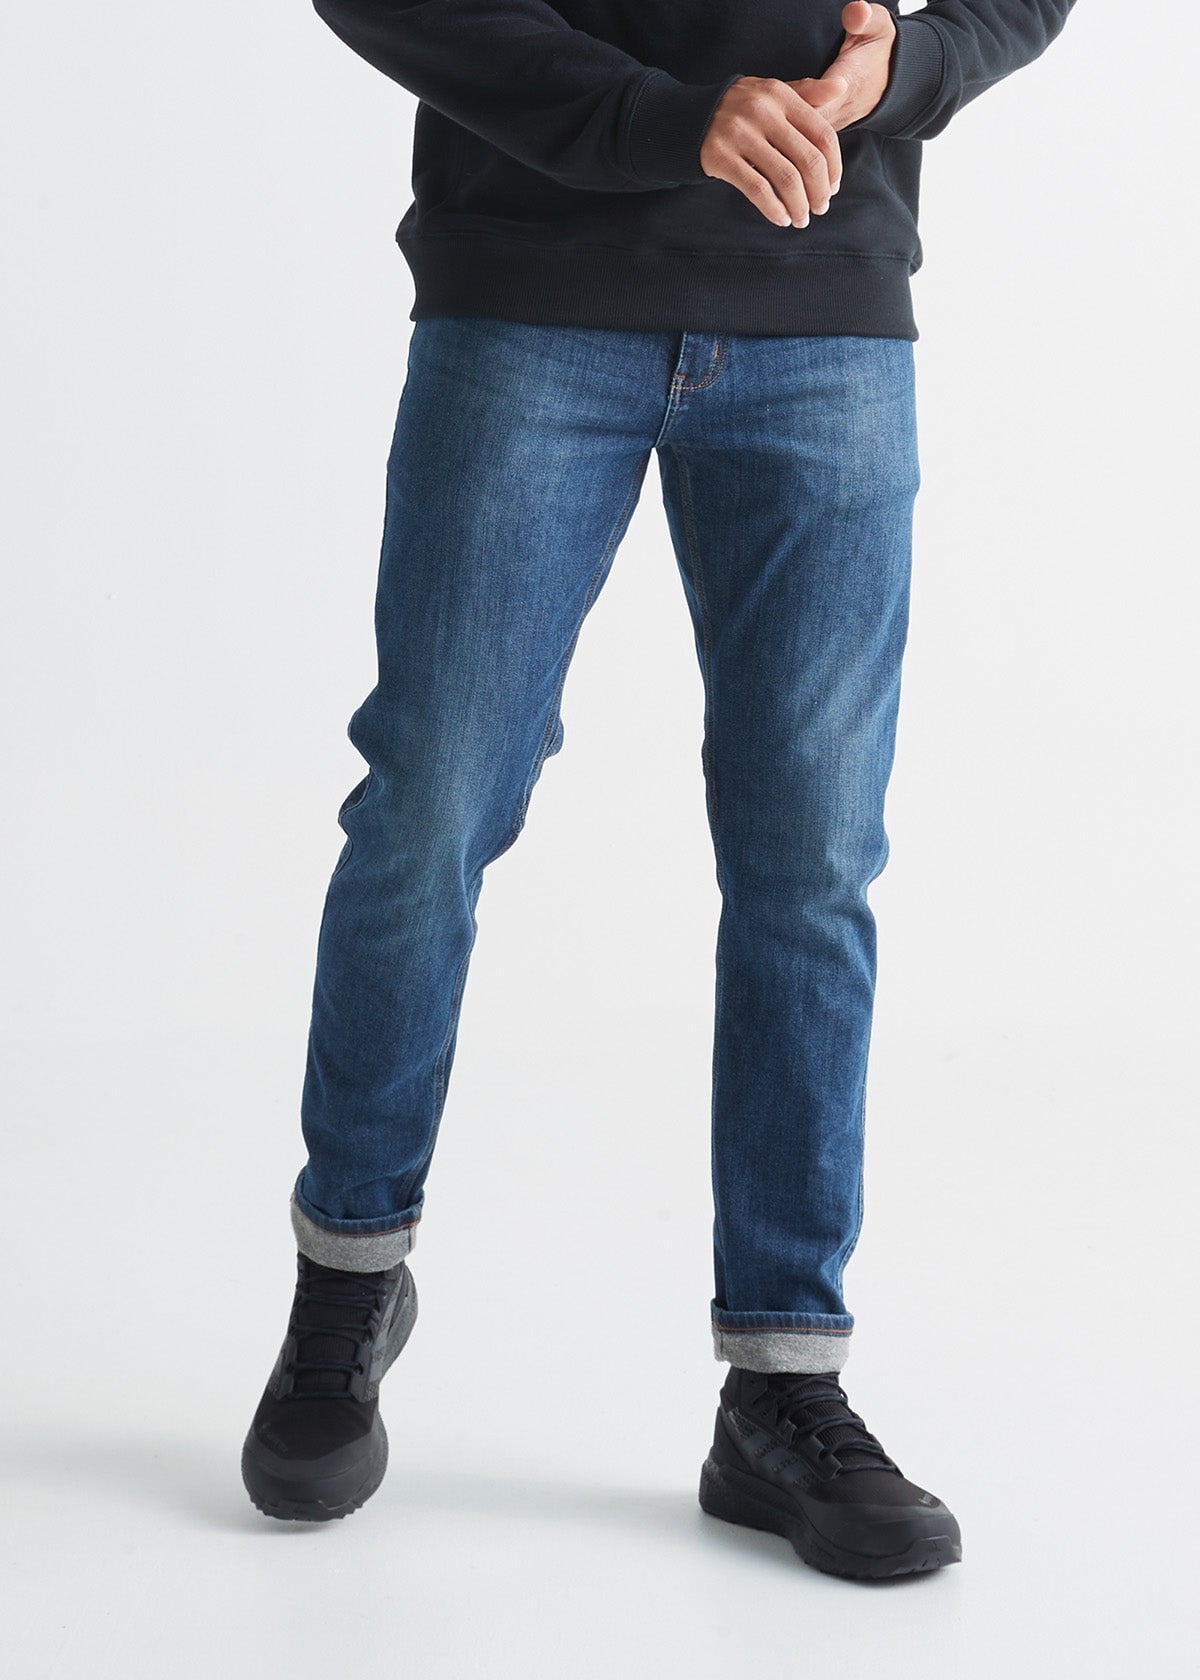 Get Cozy This Holiday With a Pair of Relaxed Fireside Denim